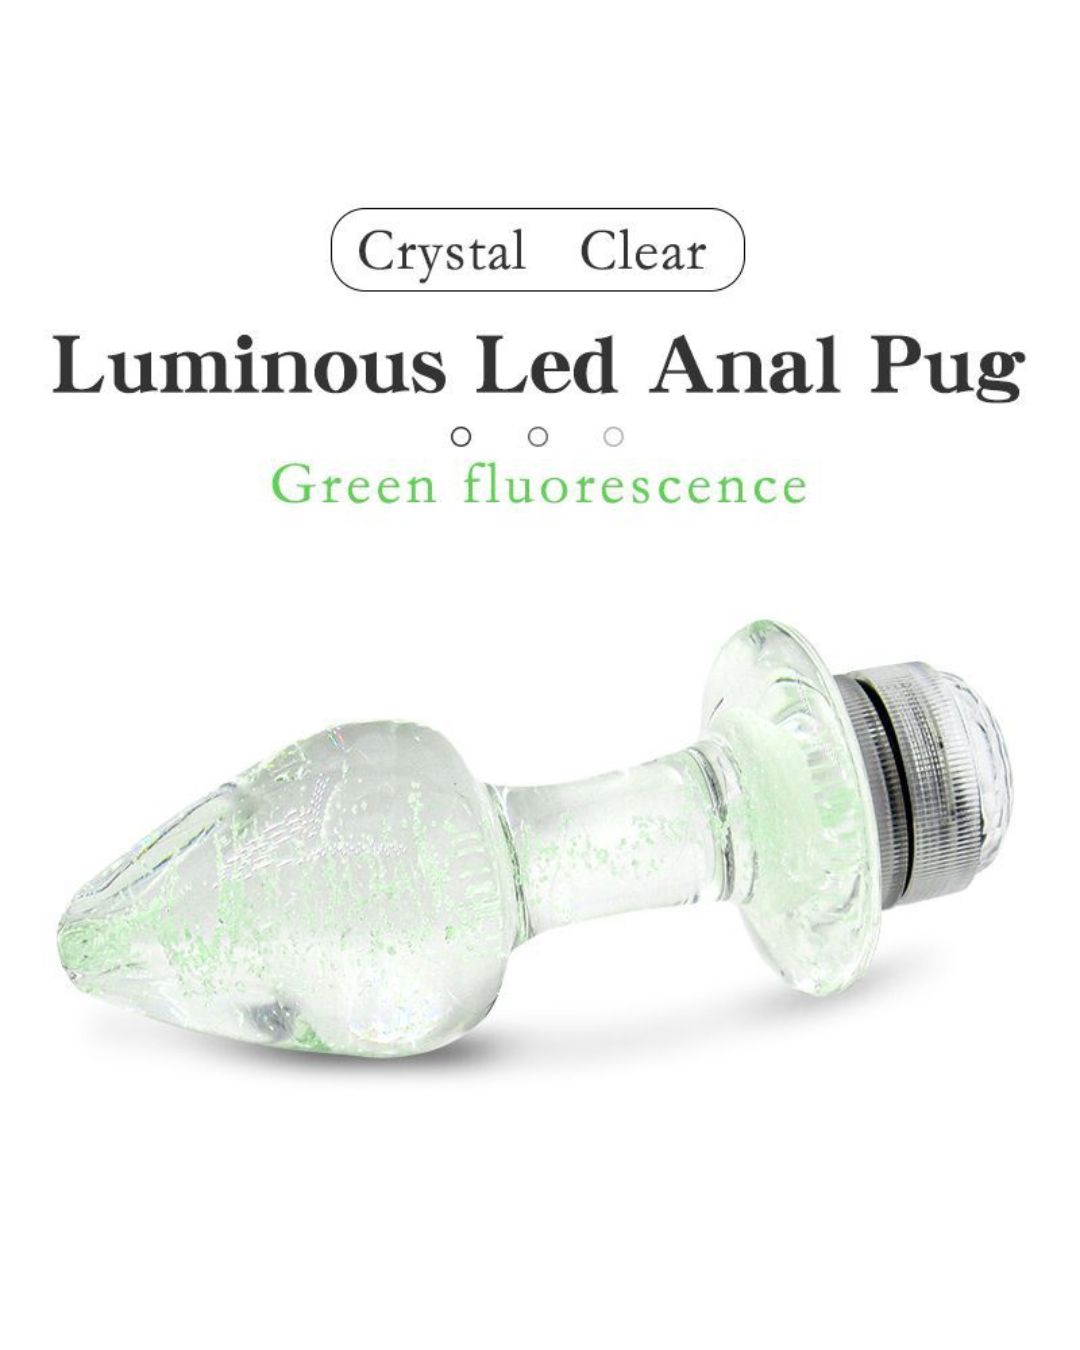 Glass Buttplug with Led